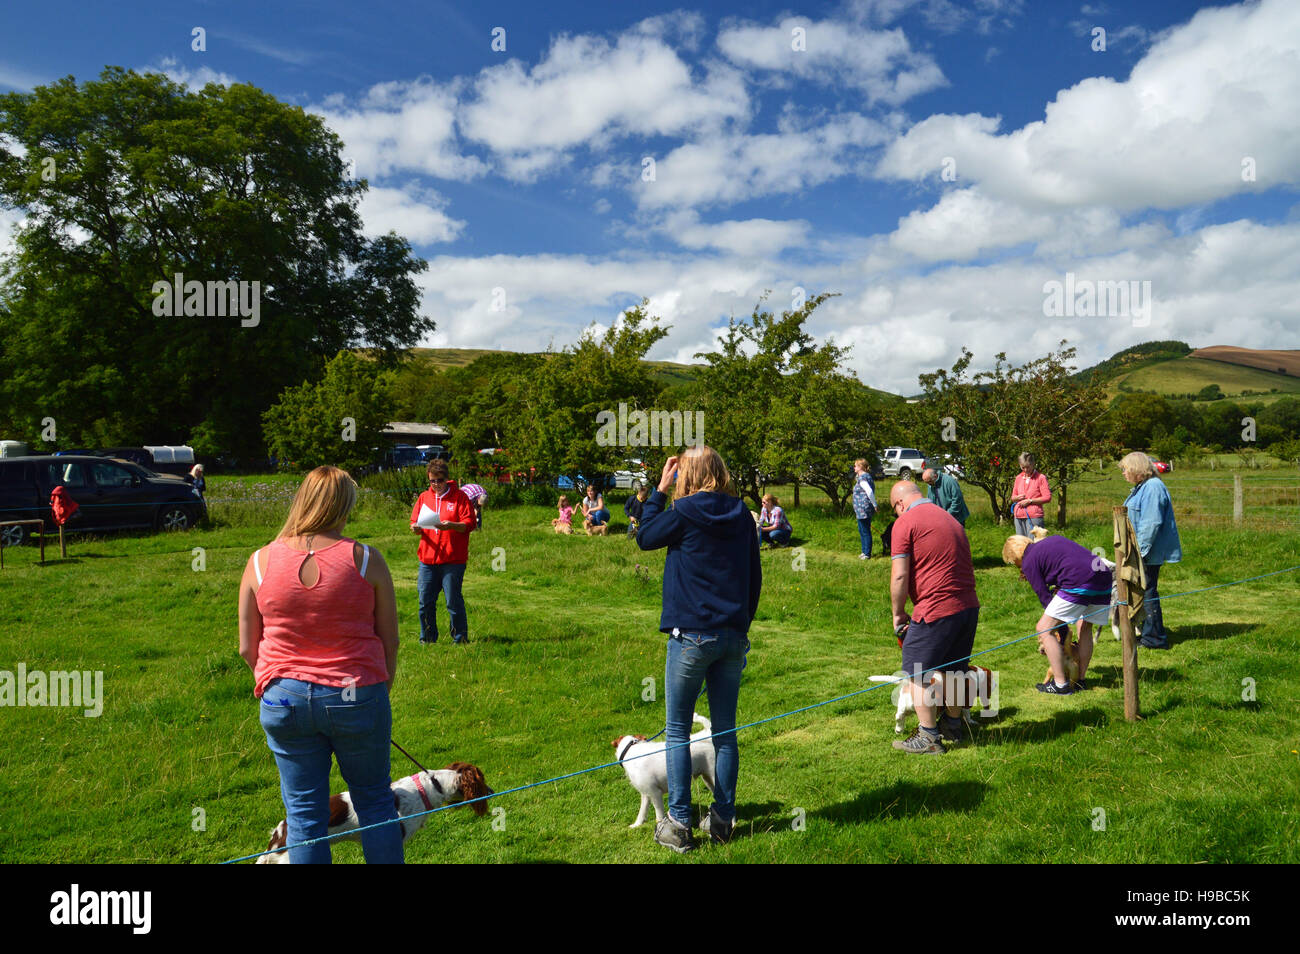 Dog show a Llanwrtyd Wells Village spettacolo agricolo, POWYS, GALLES Foto Stock